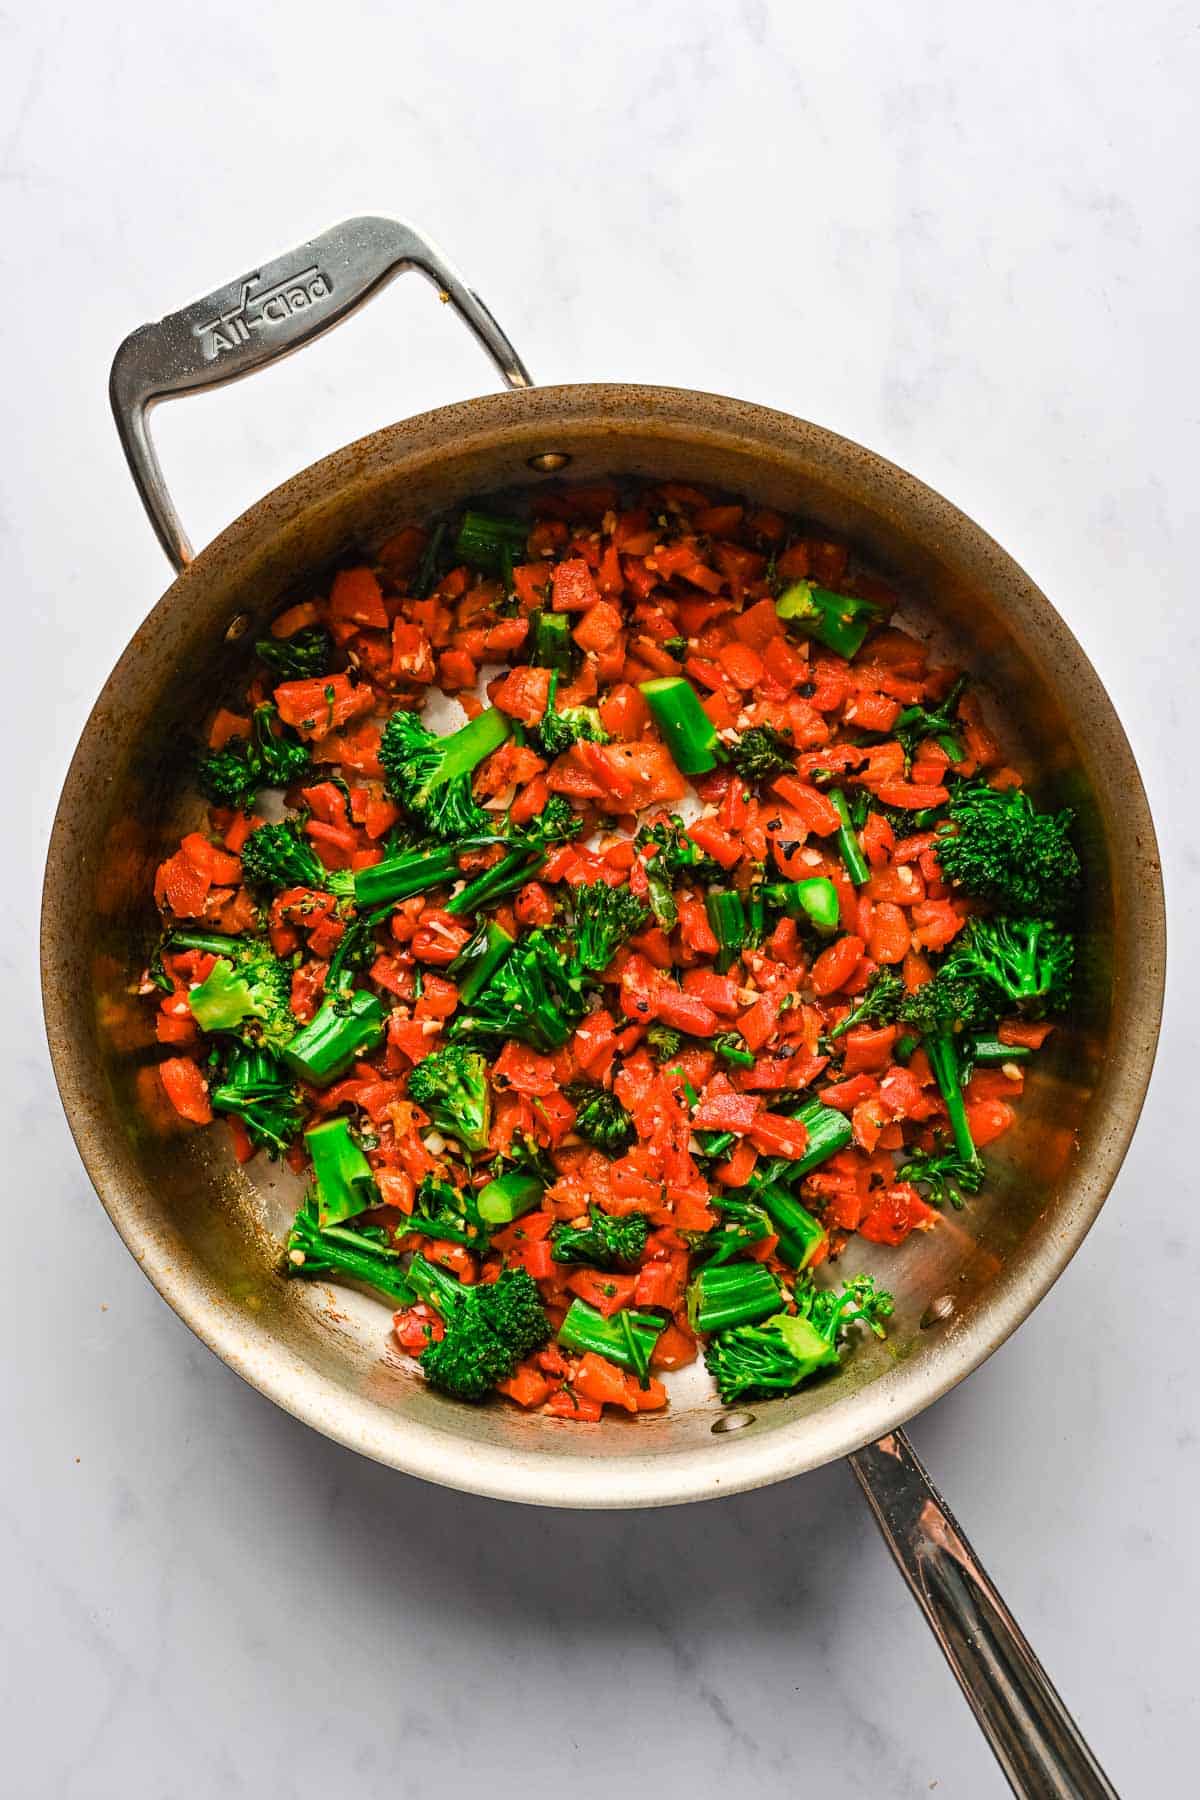 Diced roasted red peppers and broccolini in a large metal skillet.